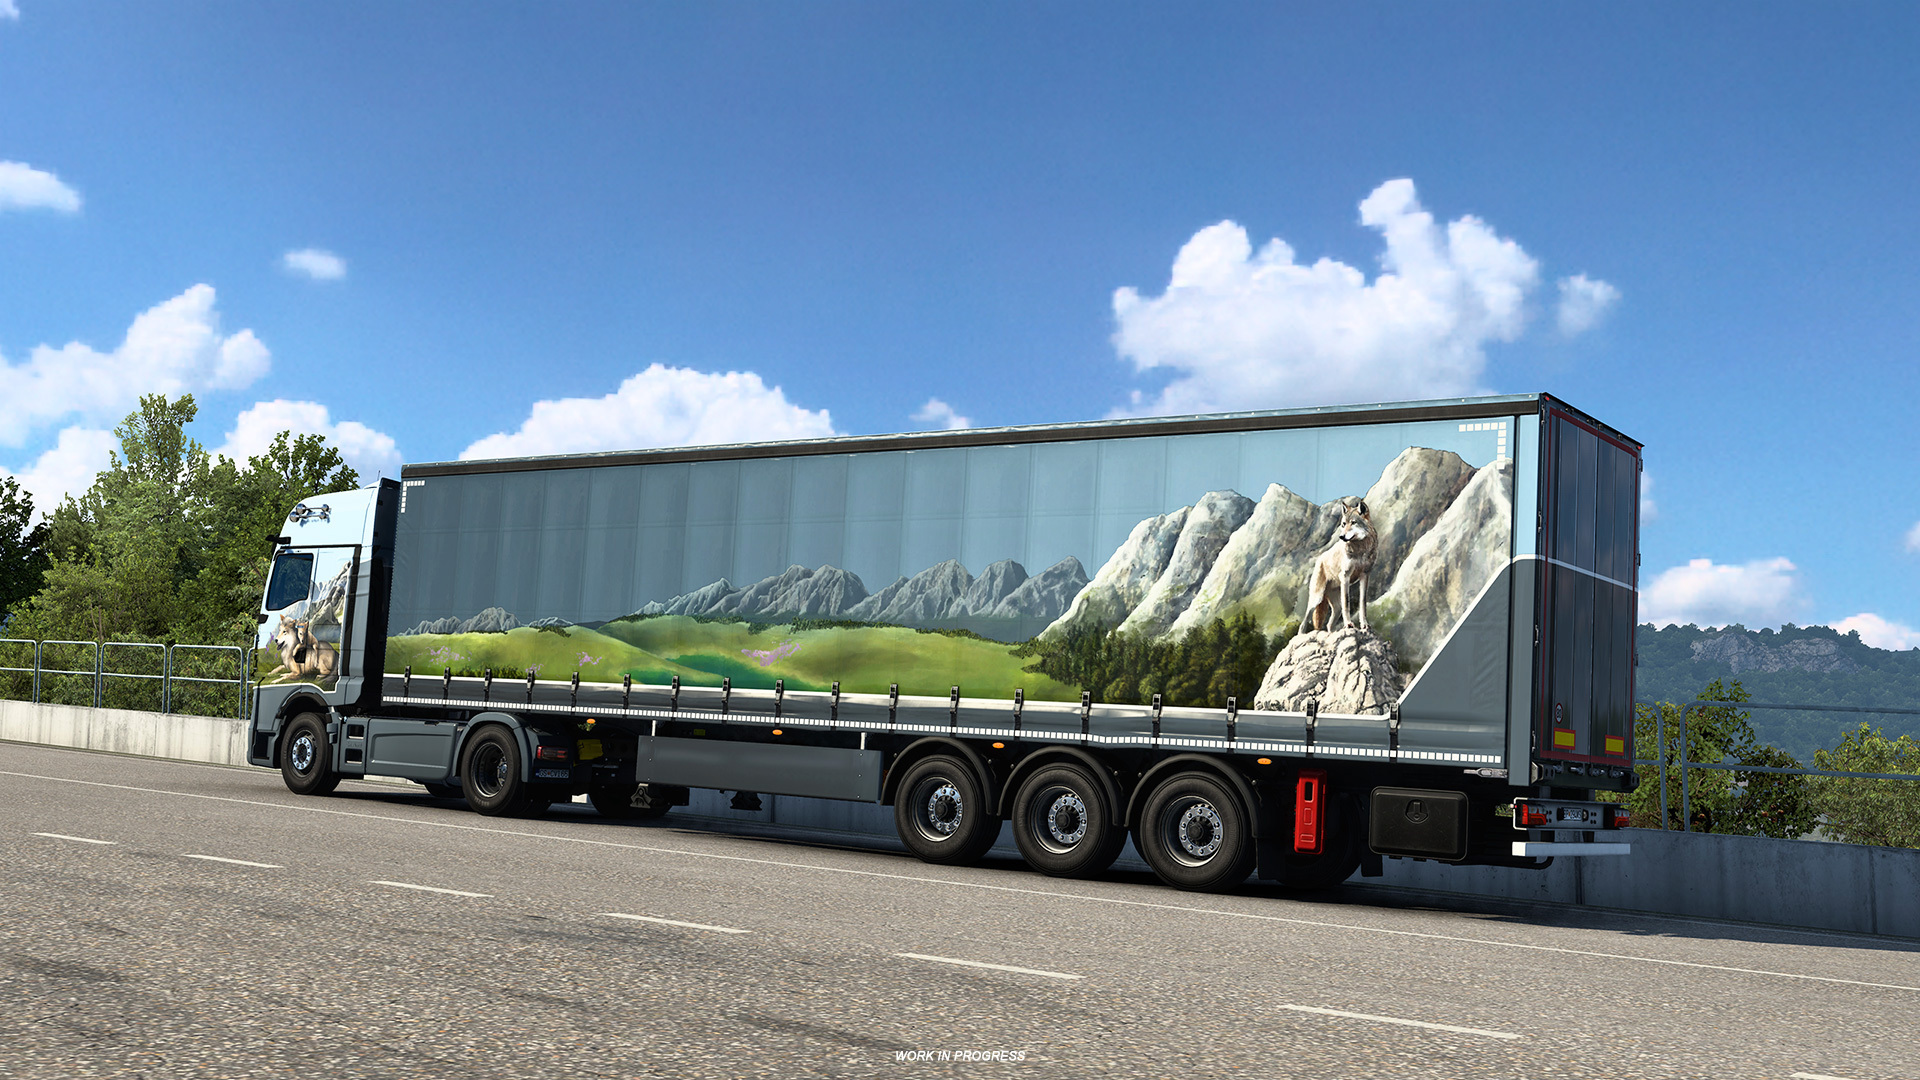 Euro Truck Simulator 2 - Convoy on the Horizon, Get Ready to Join! - Steam  News